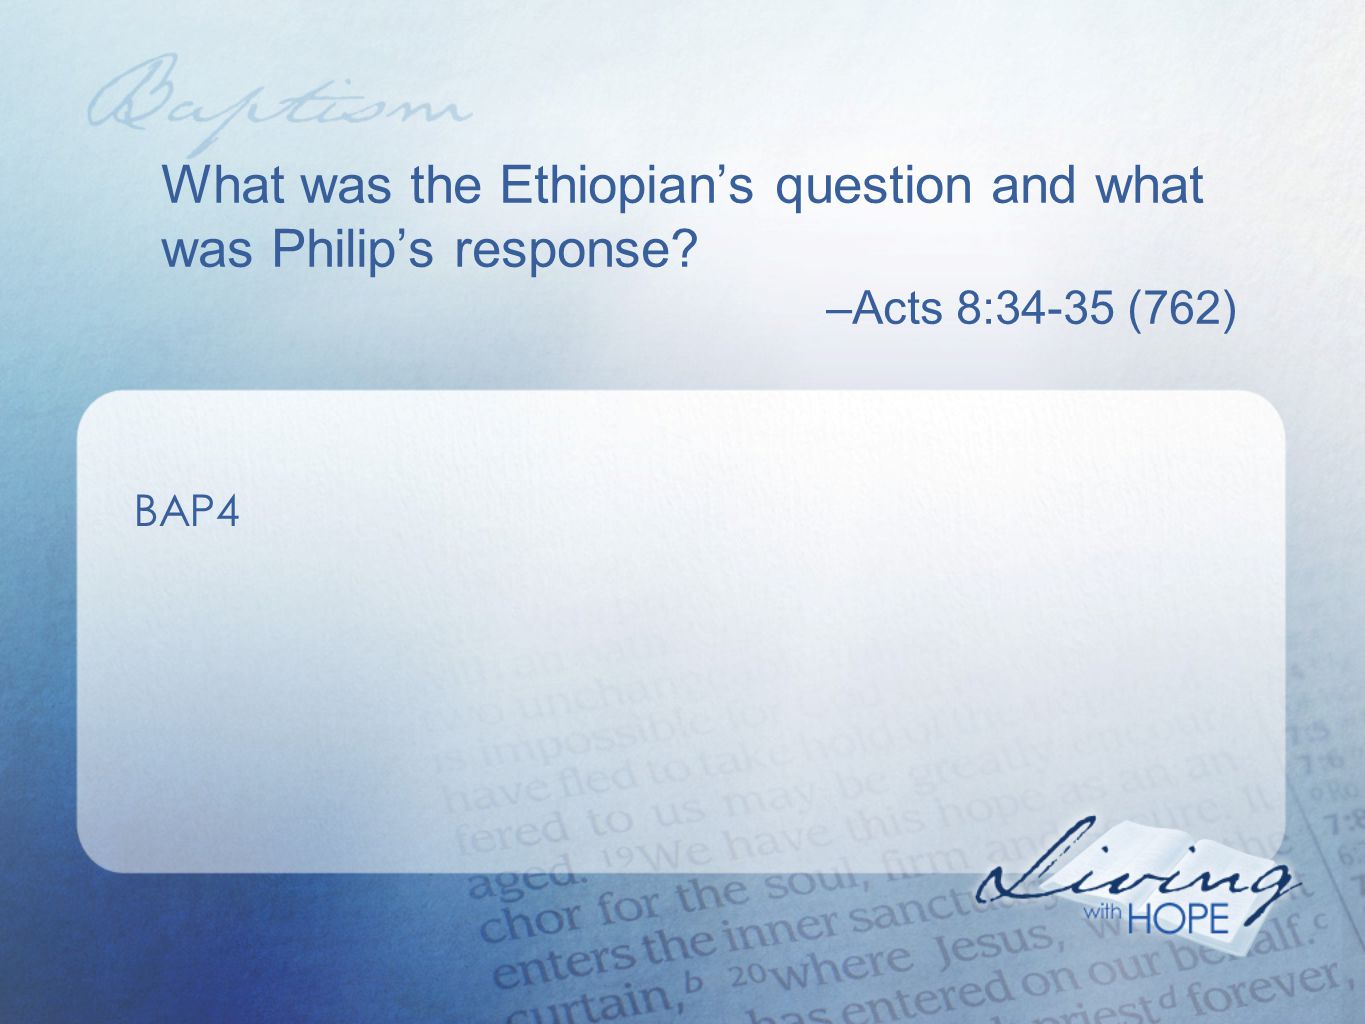 What was the Ethiopian’s question and what was Philip’s response –Acts 8:34-35 (762) BAP4